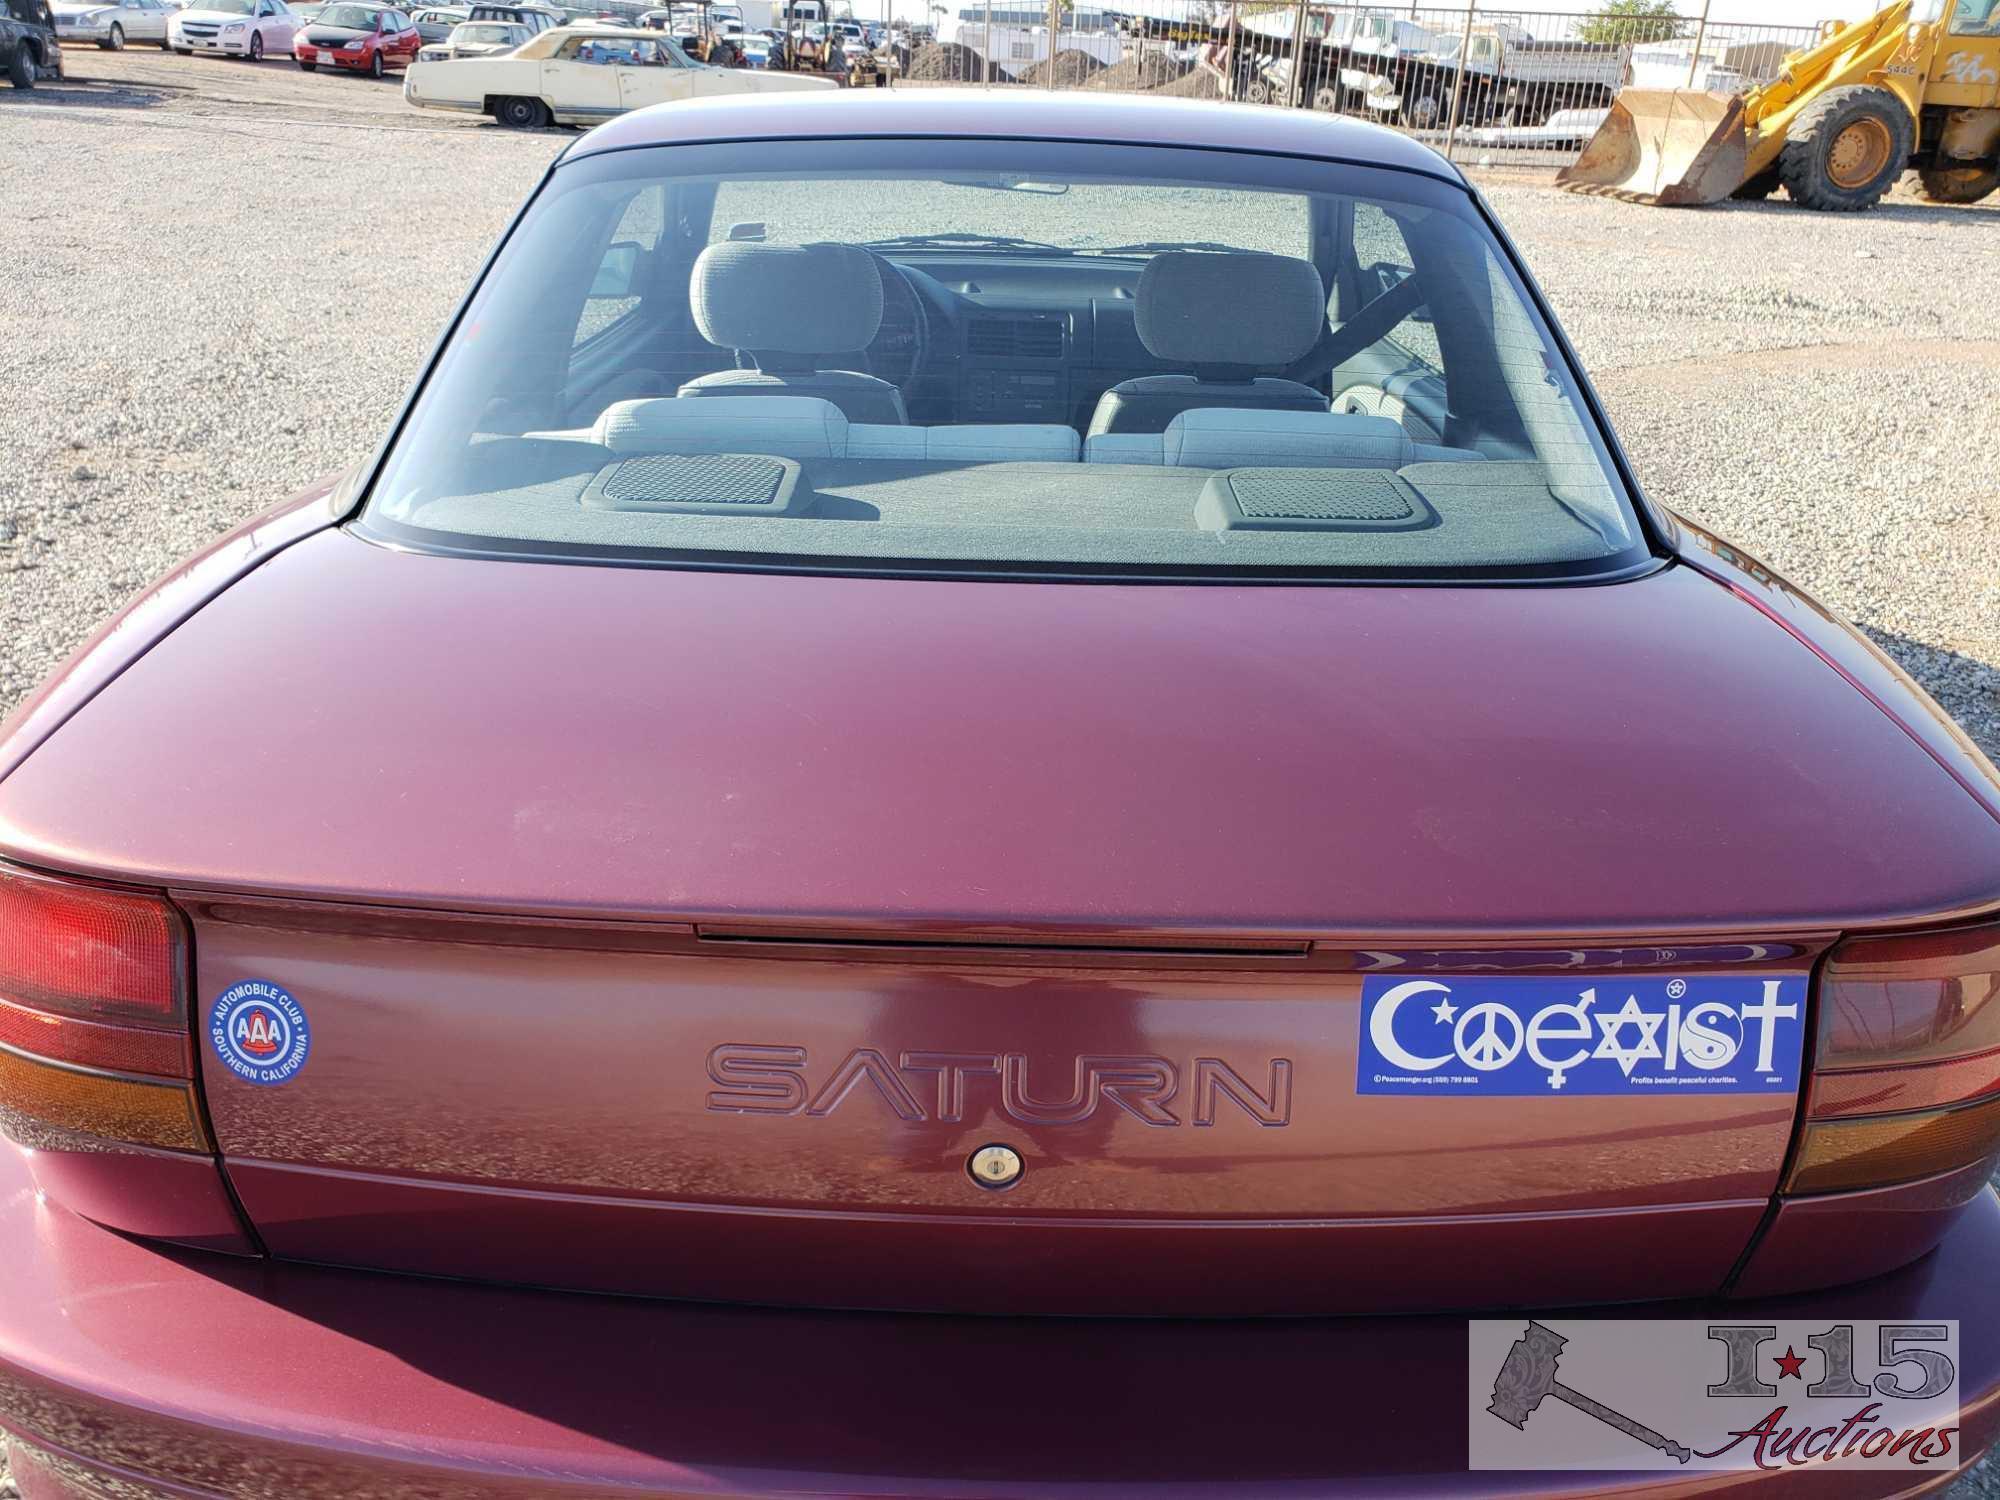 1993 Saturn SC1 2 door coupe (Very clean car inside and out) CURRENT SMOG, CLEAN AUTO REPORT!!!